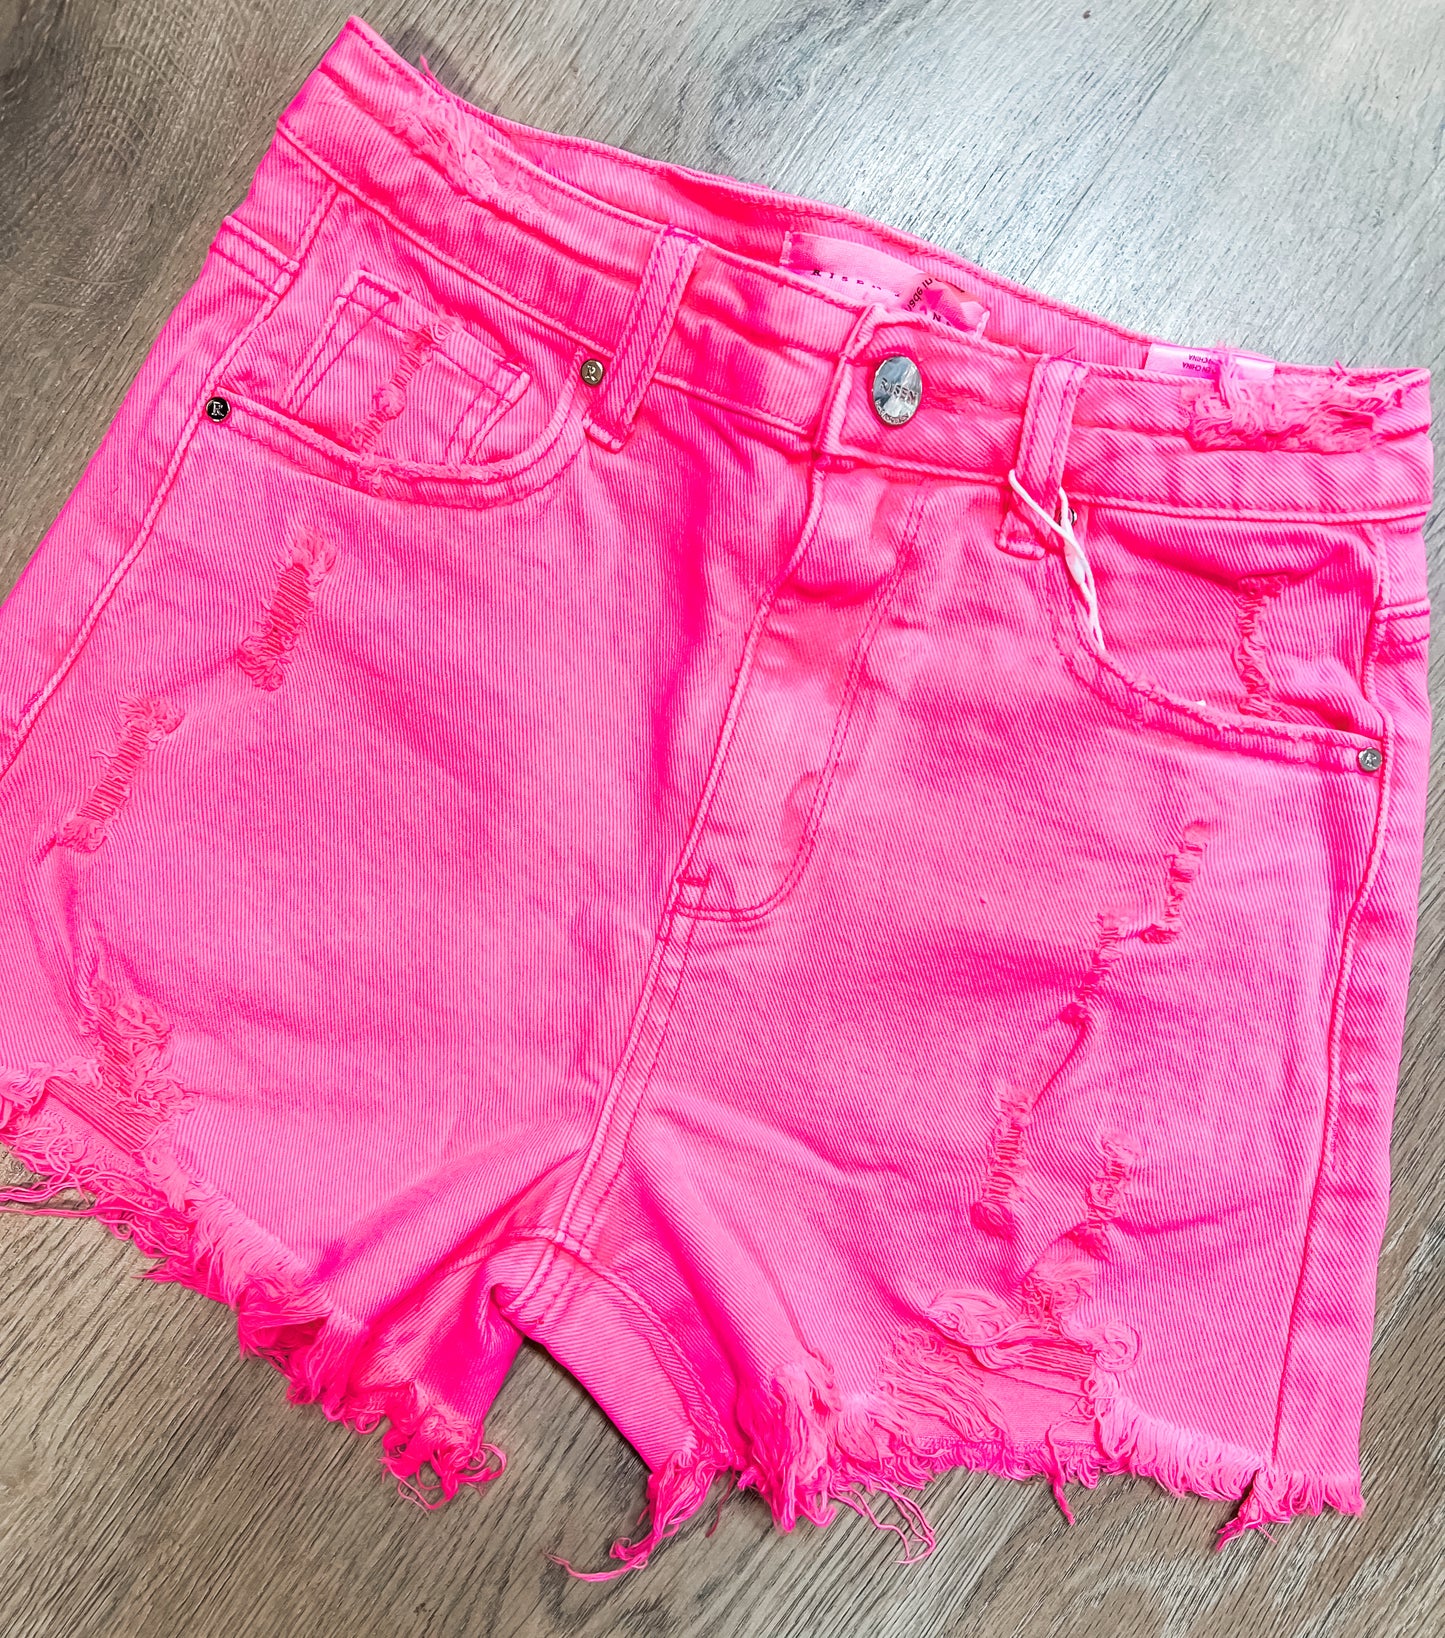 The Avery High Rise Distressed Shorts